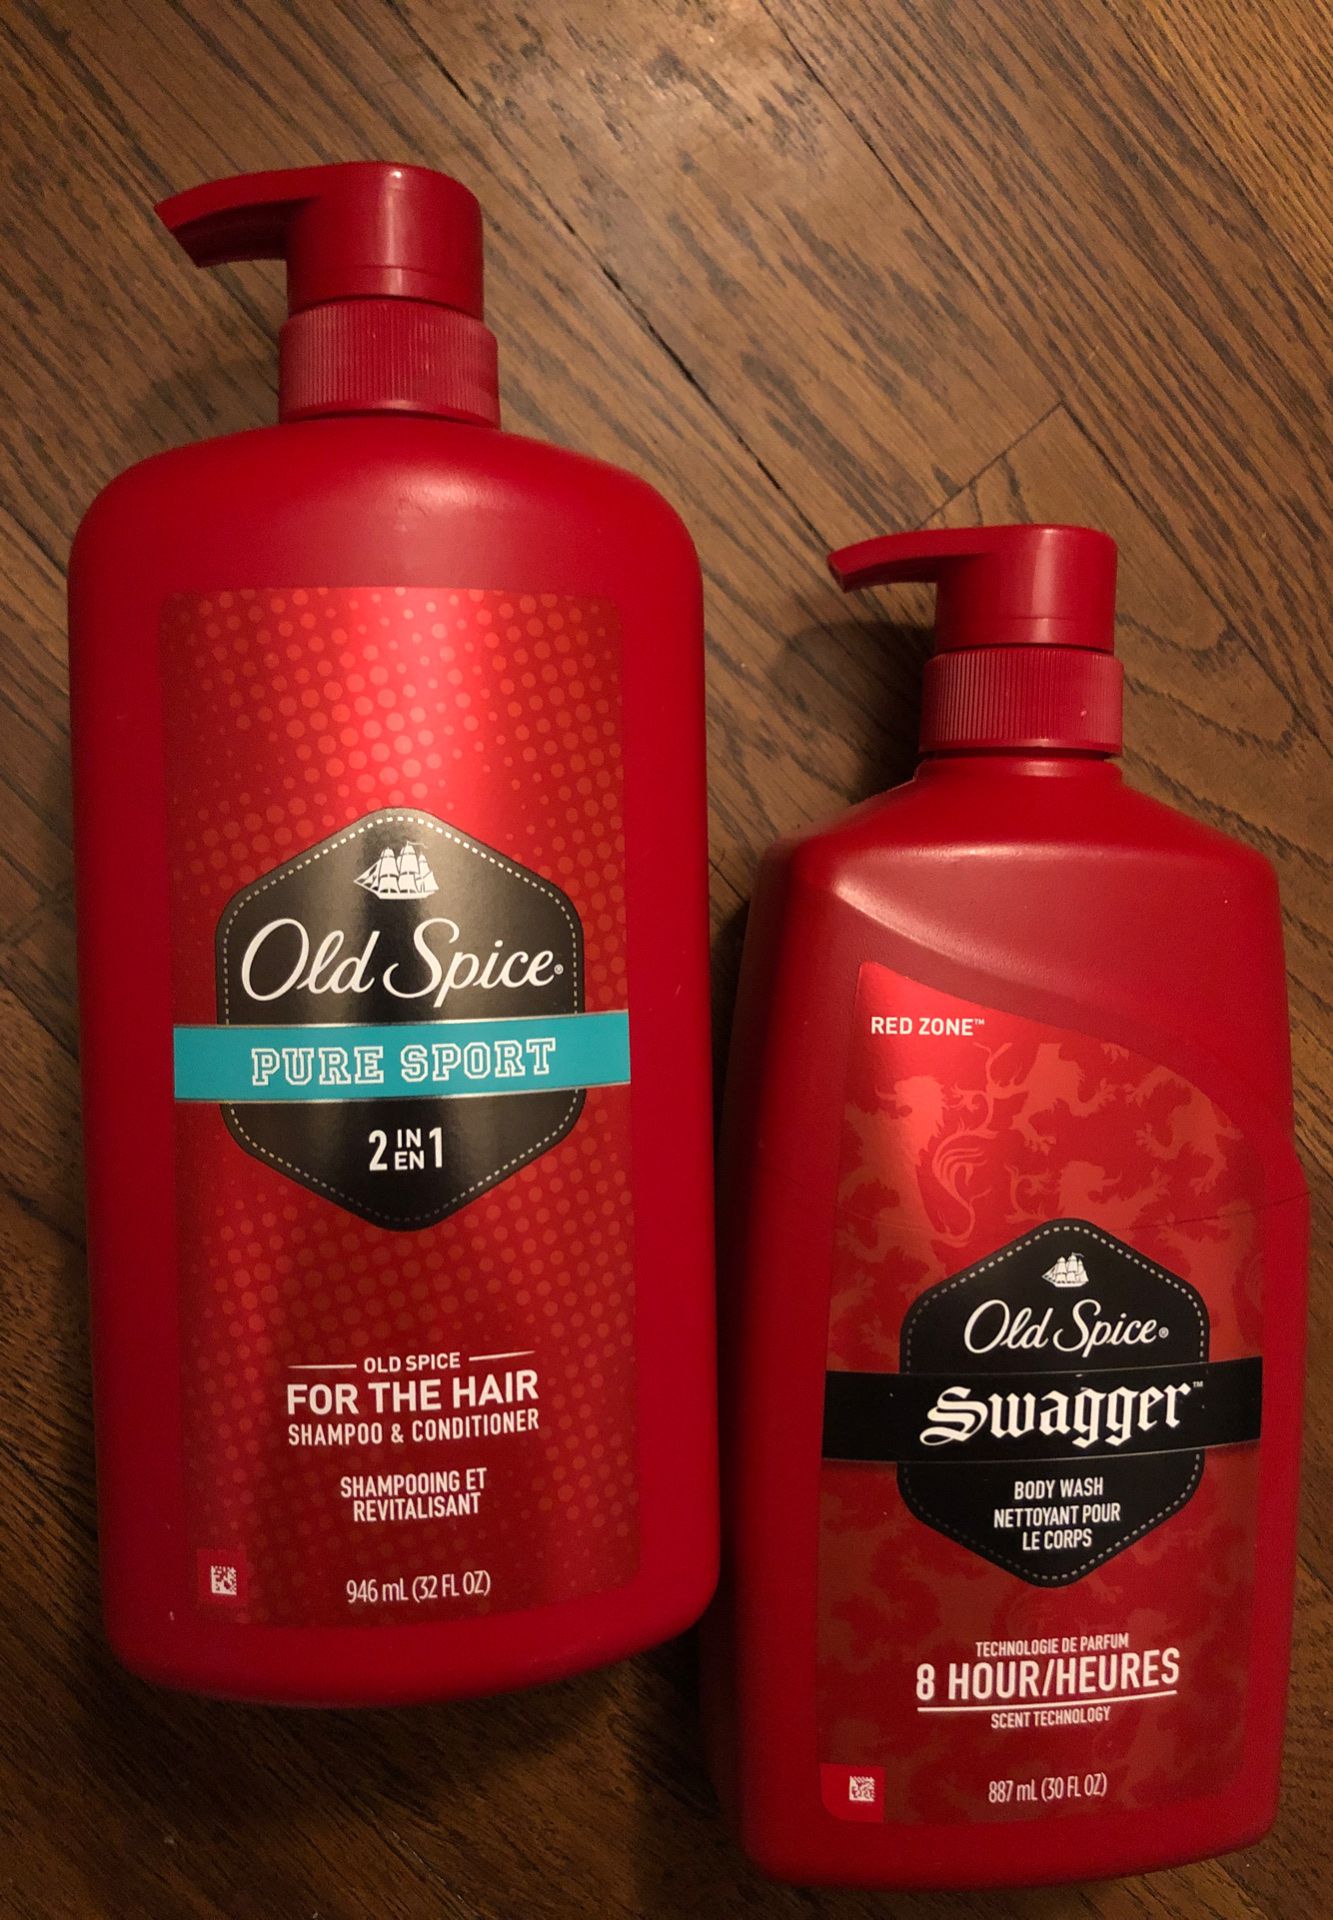 Old Spice hair and body